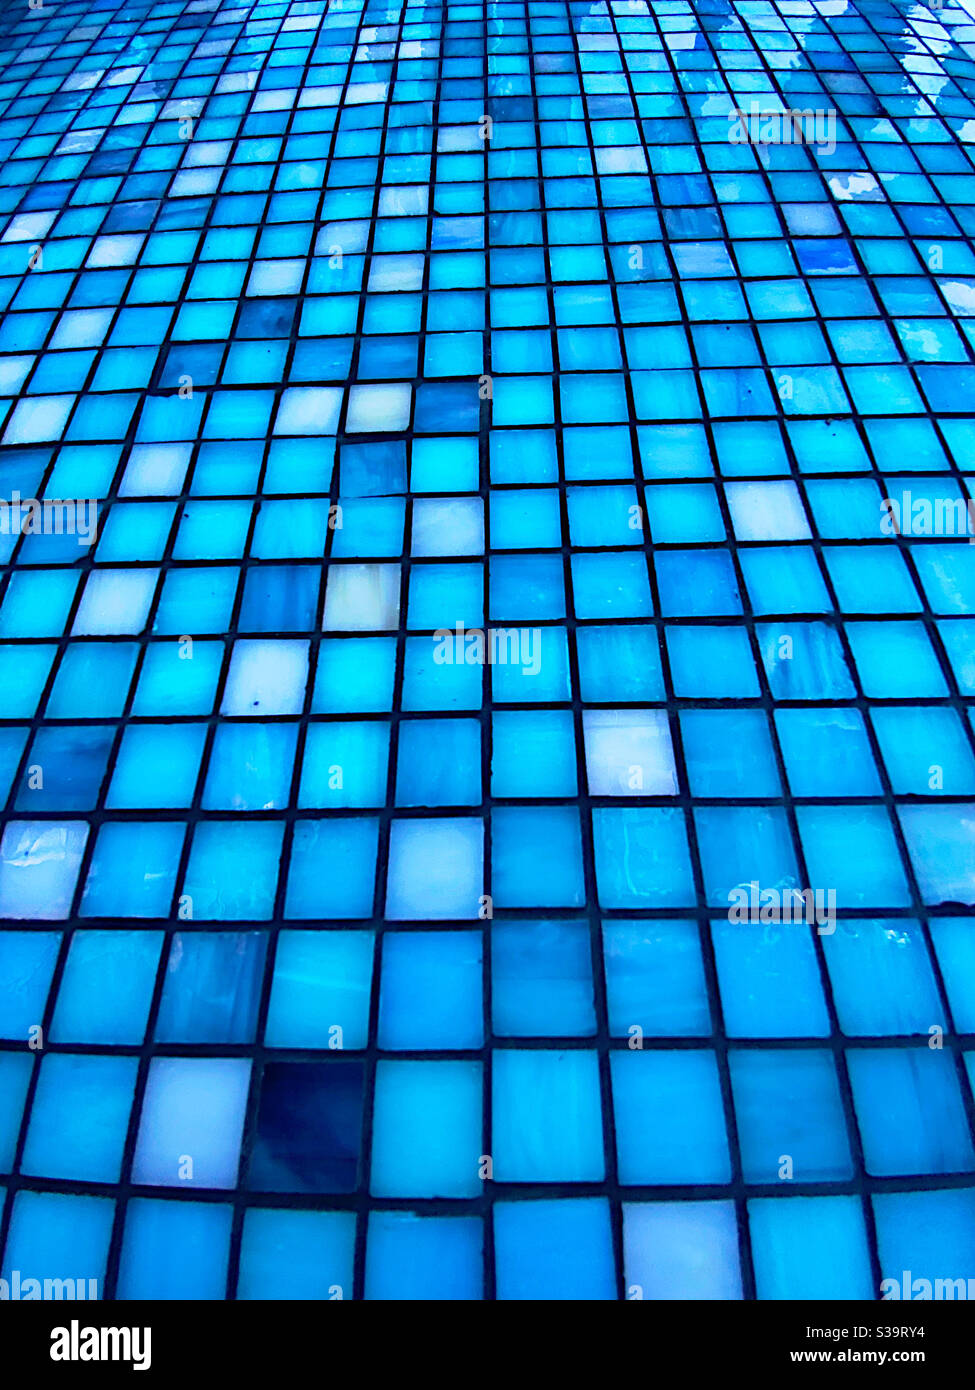 Grid of blue and white ceramic tiles Stock Photo